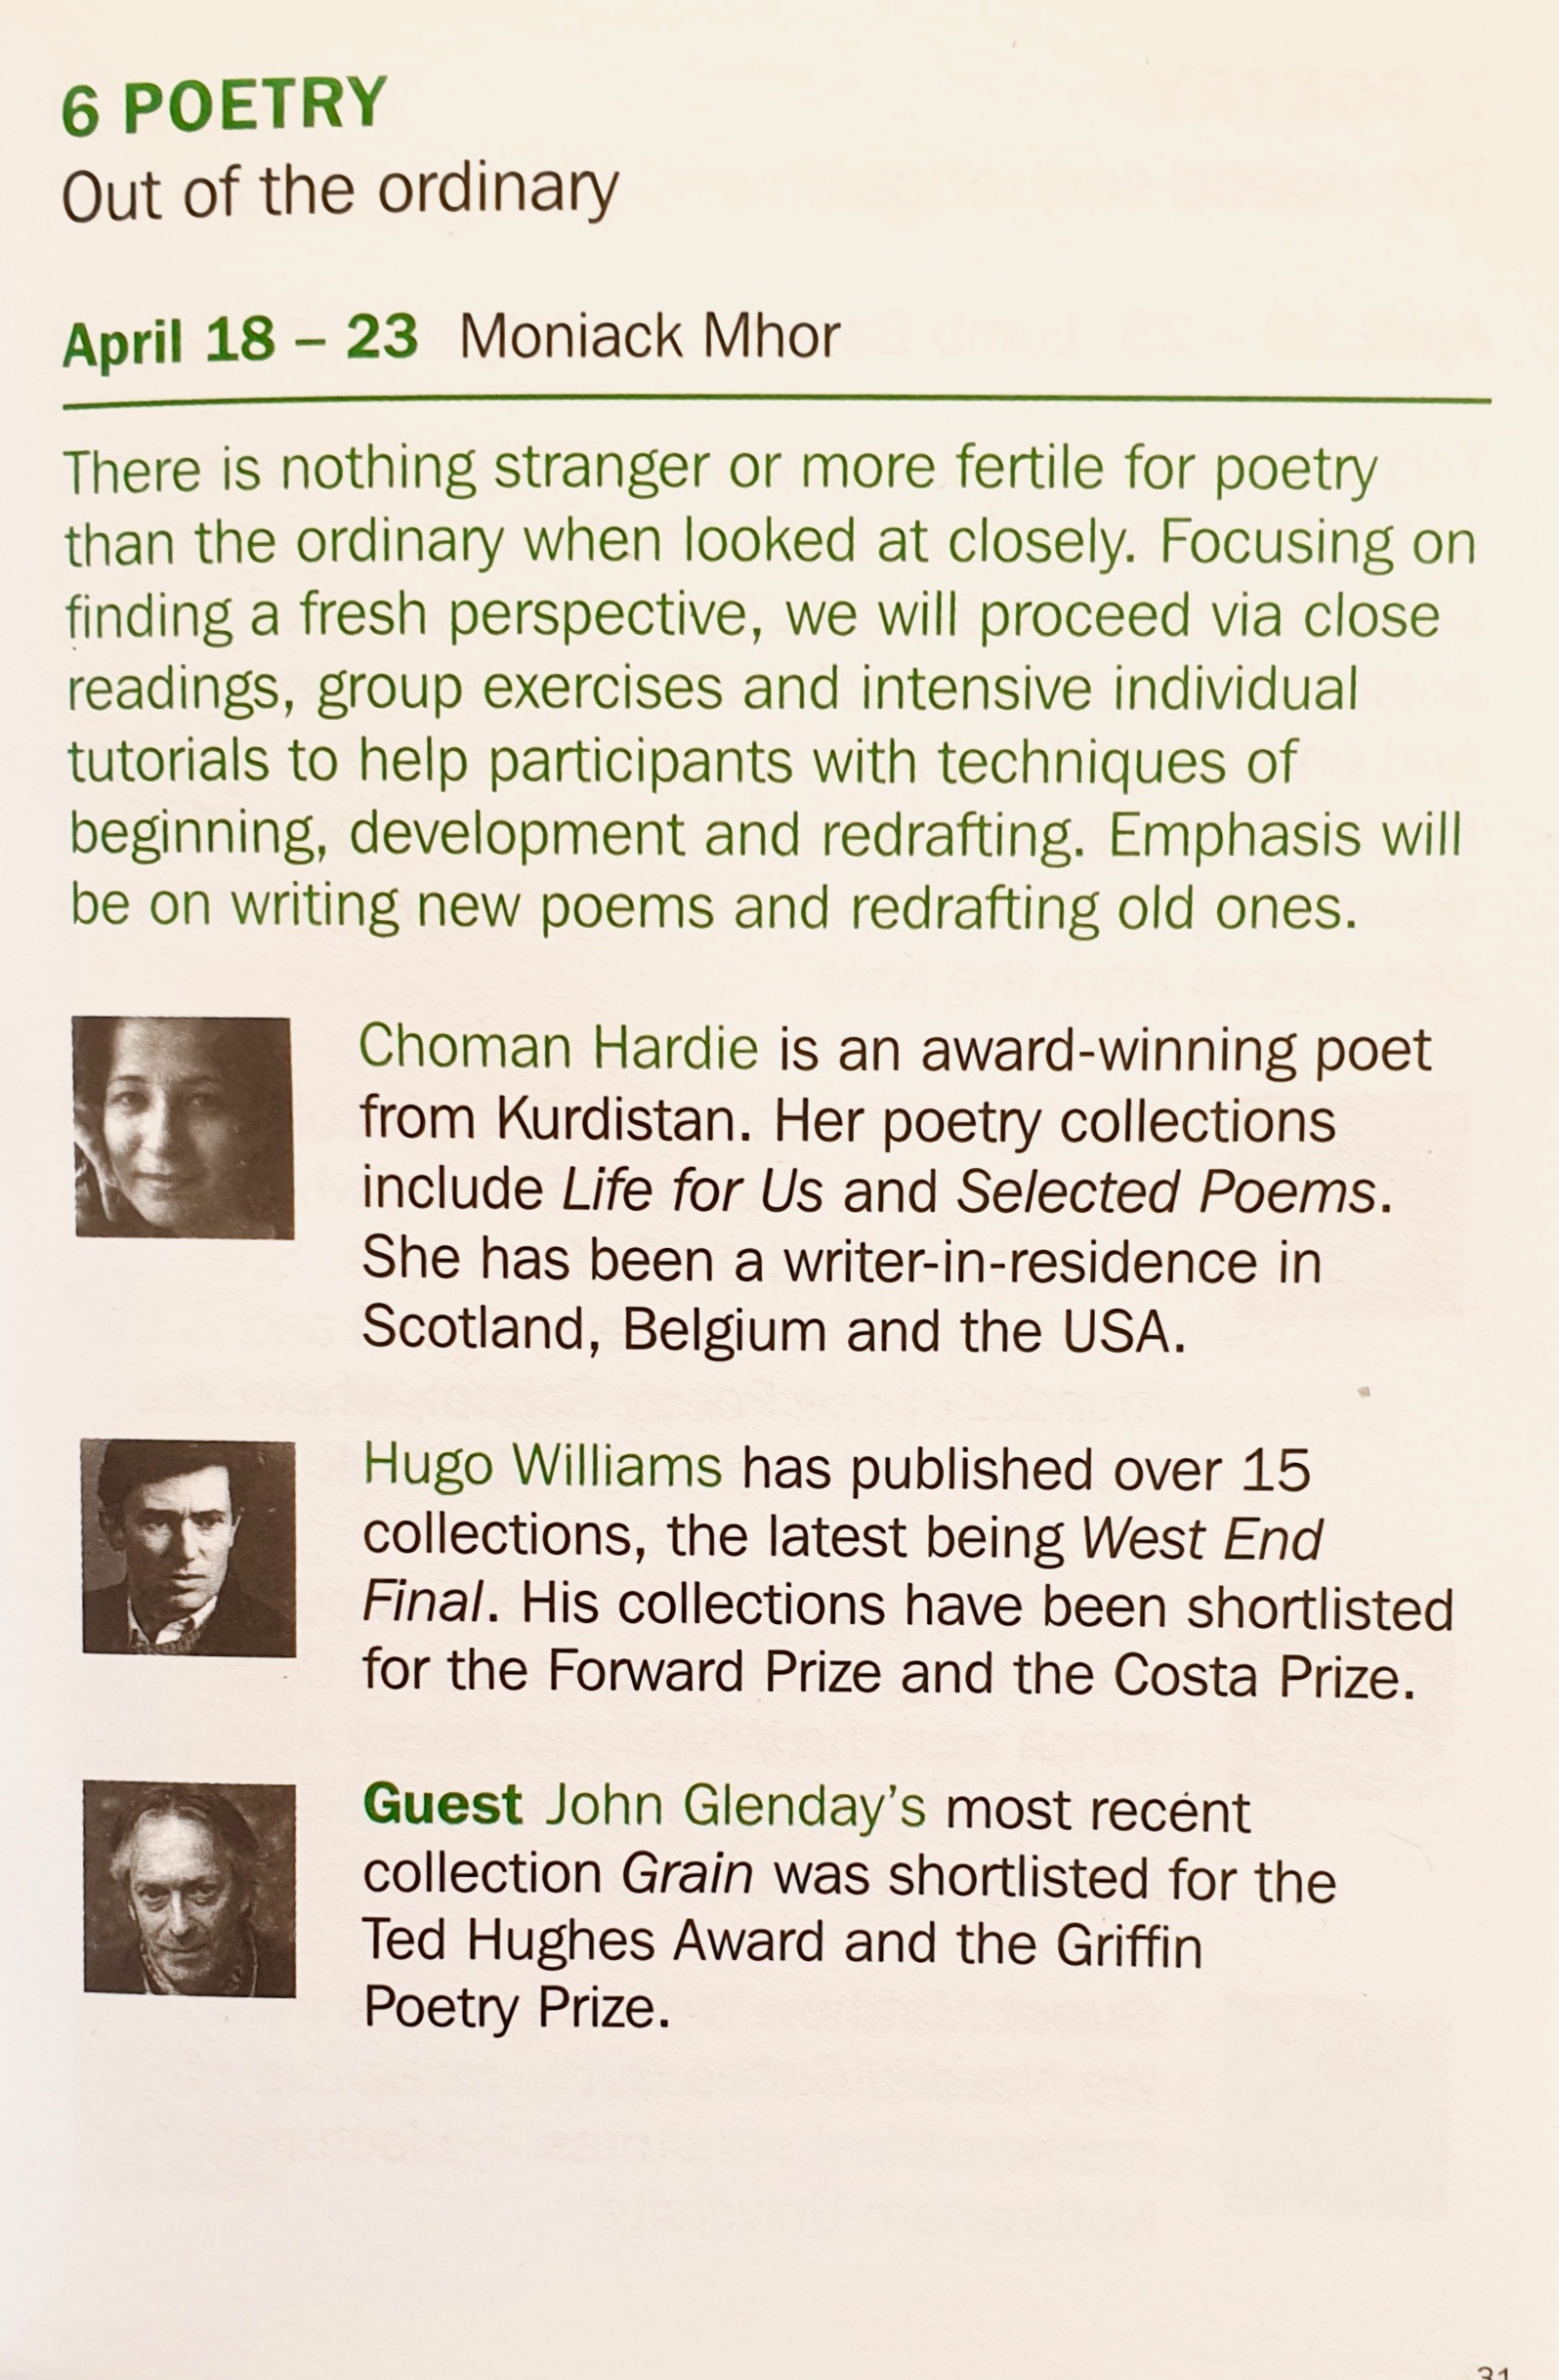 Residential Poetry Writing Course with John Glenday